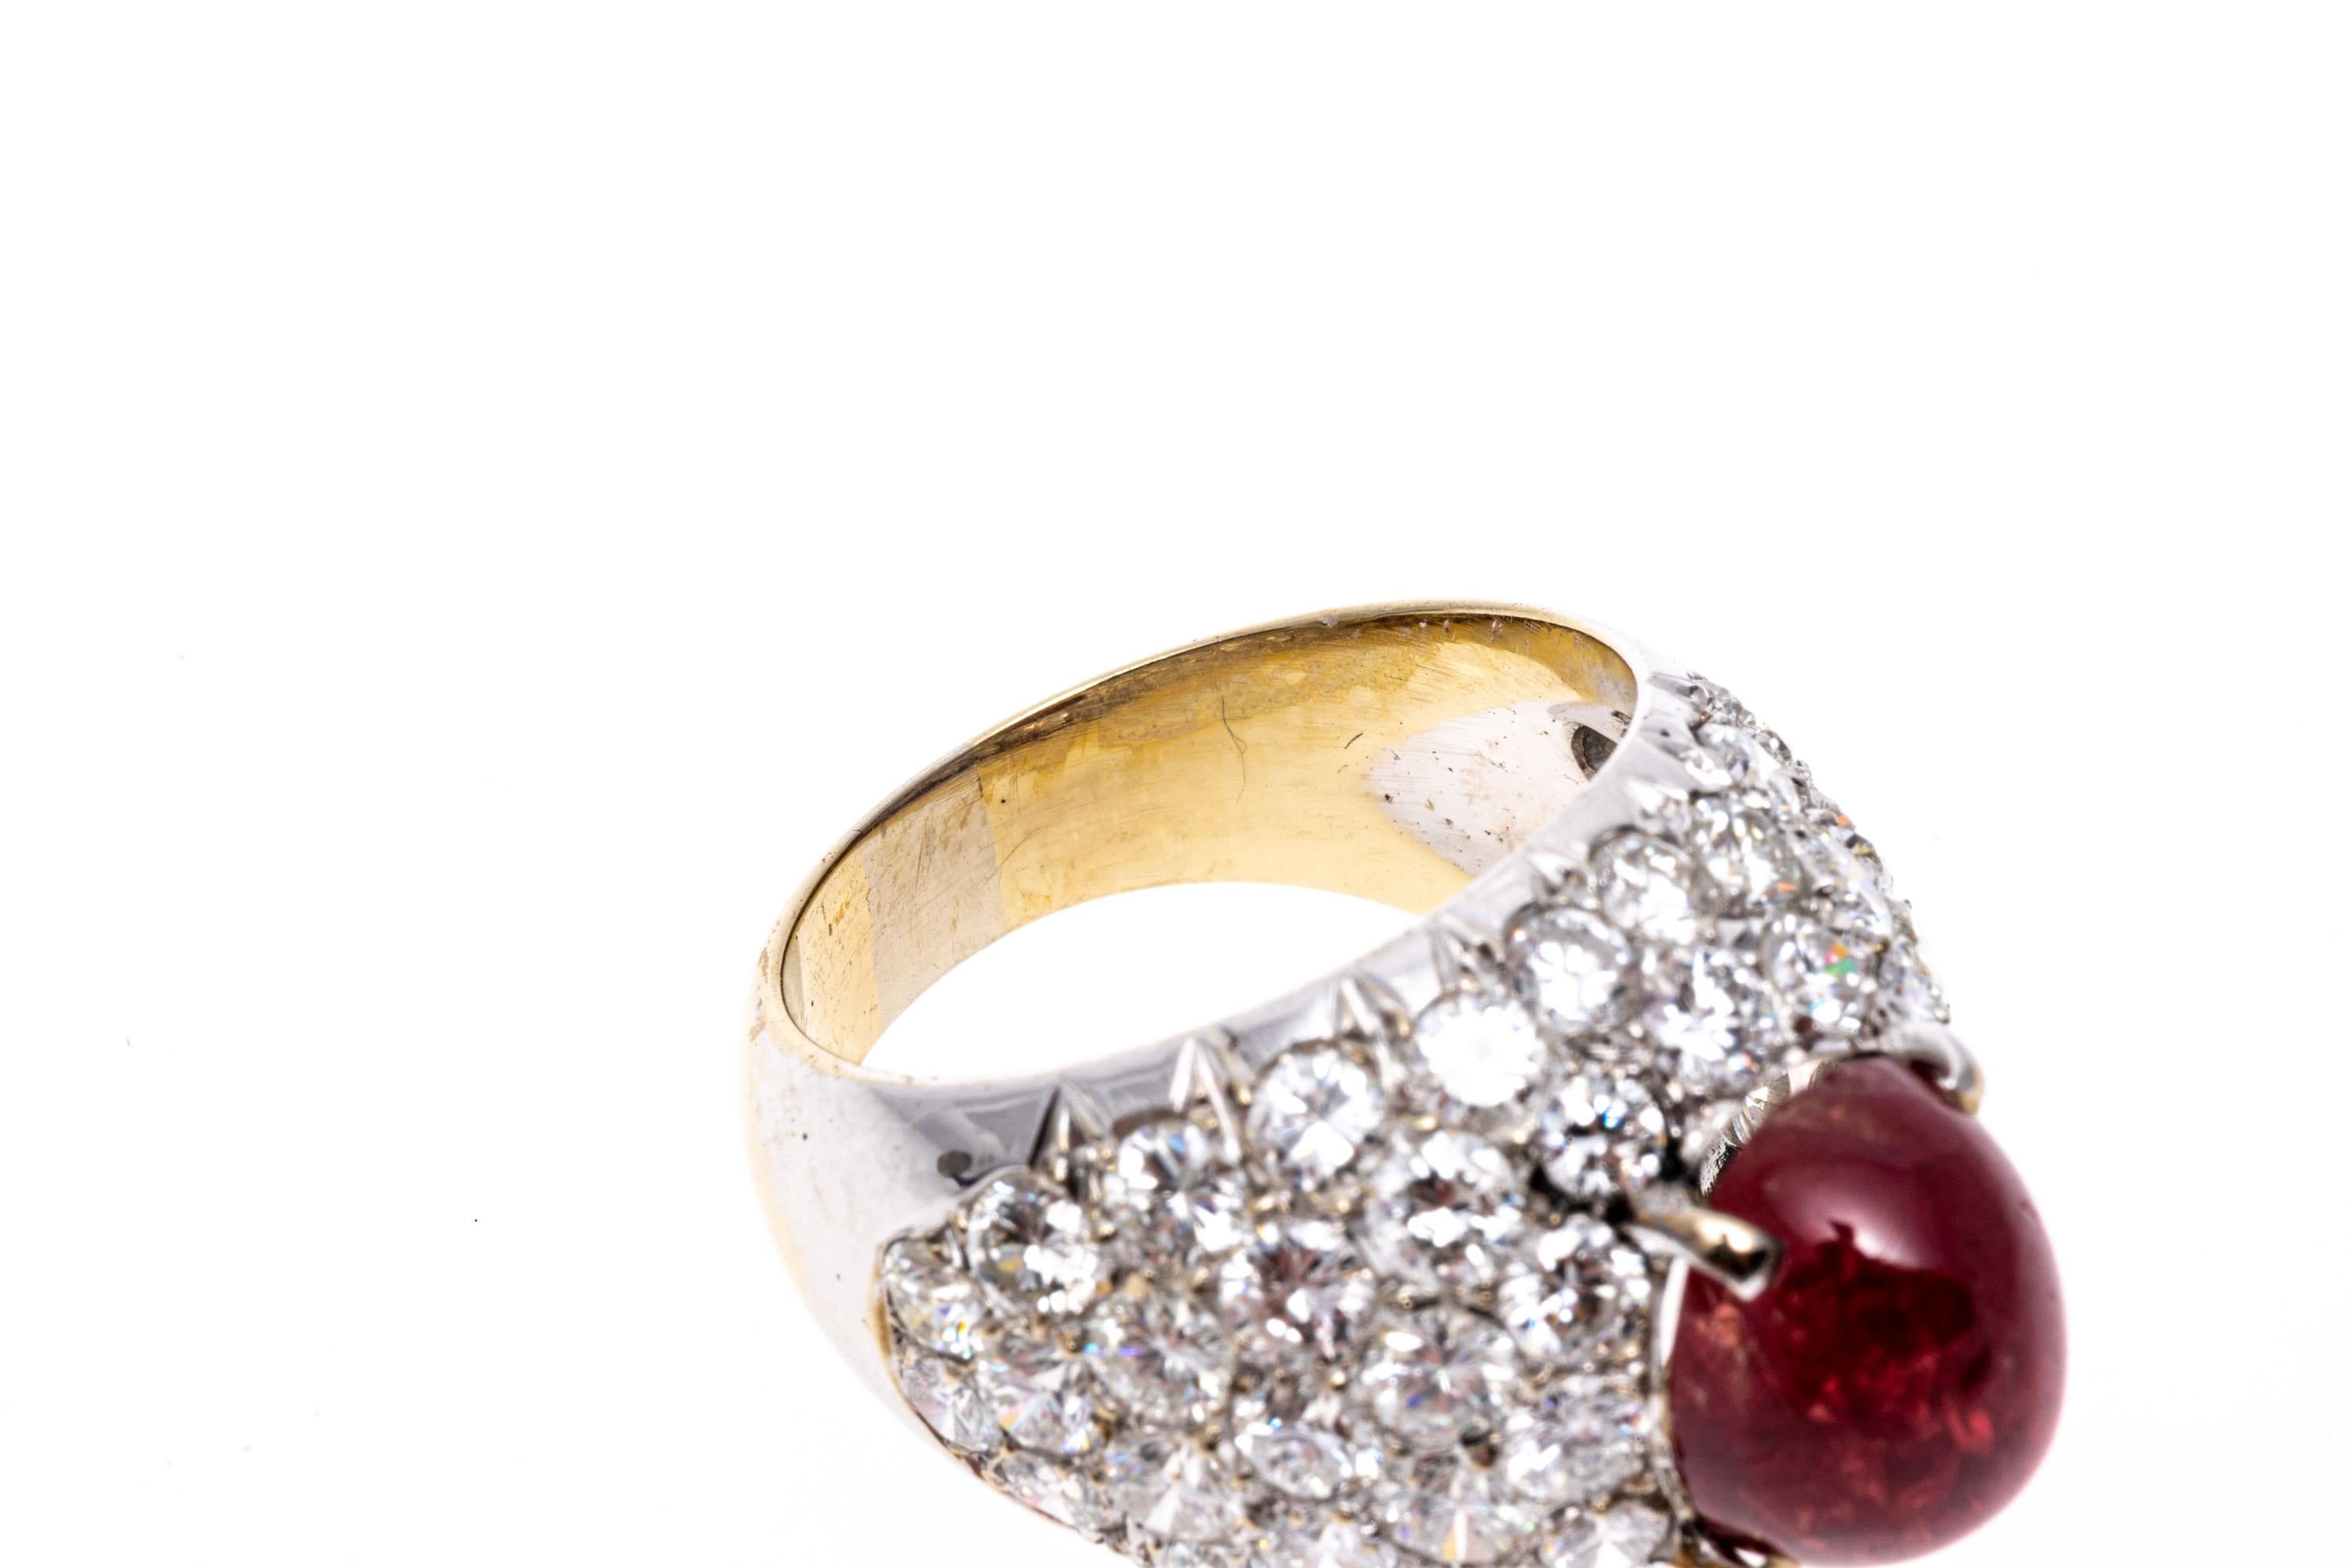 18k Natural No Heat Ruby Cabachon And Large Pave Diamond Dome Ring.
This truly amazing large dome ring features a large cabachon cut, red color natural no heat ruby, approximately 4.54 CTS, surrounded by a field of large, pave set, near colorless